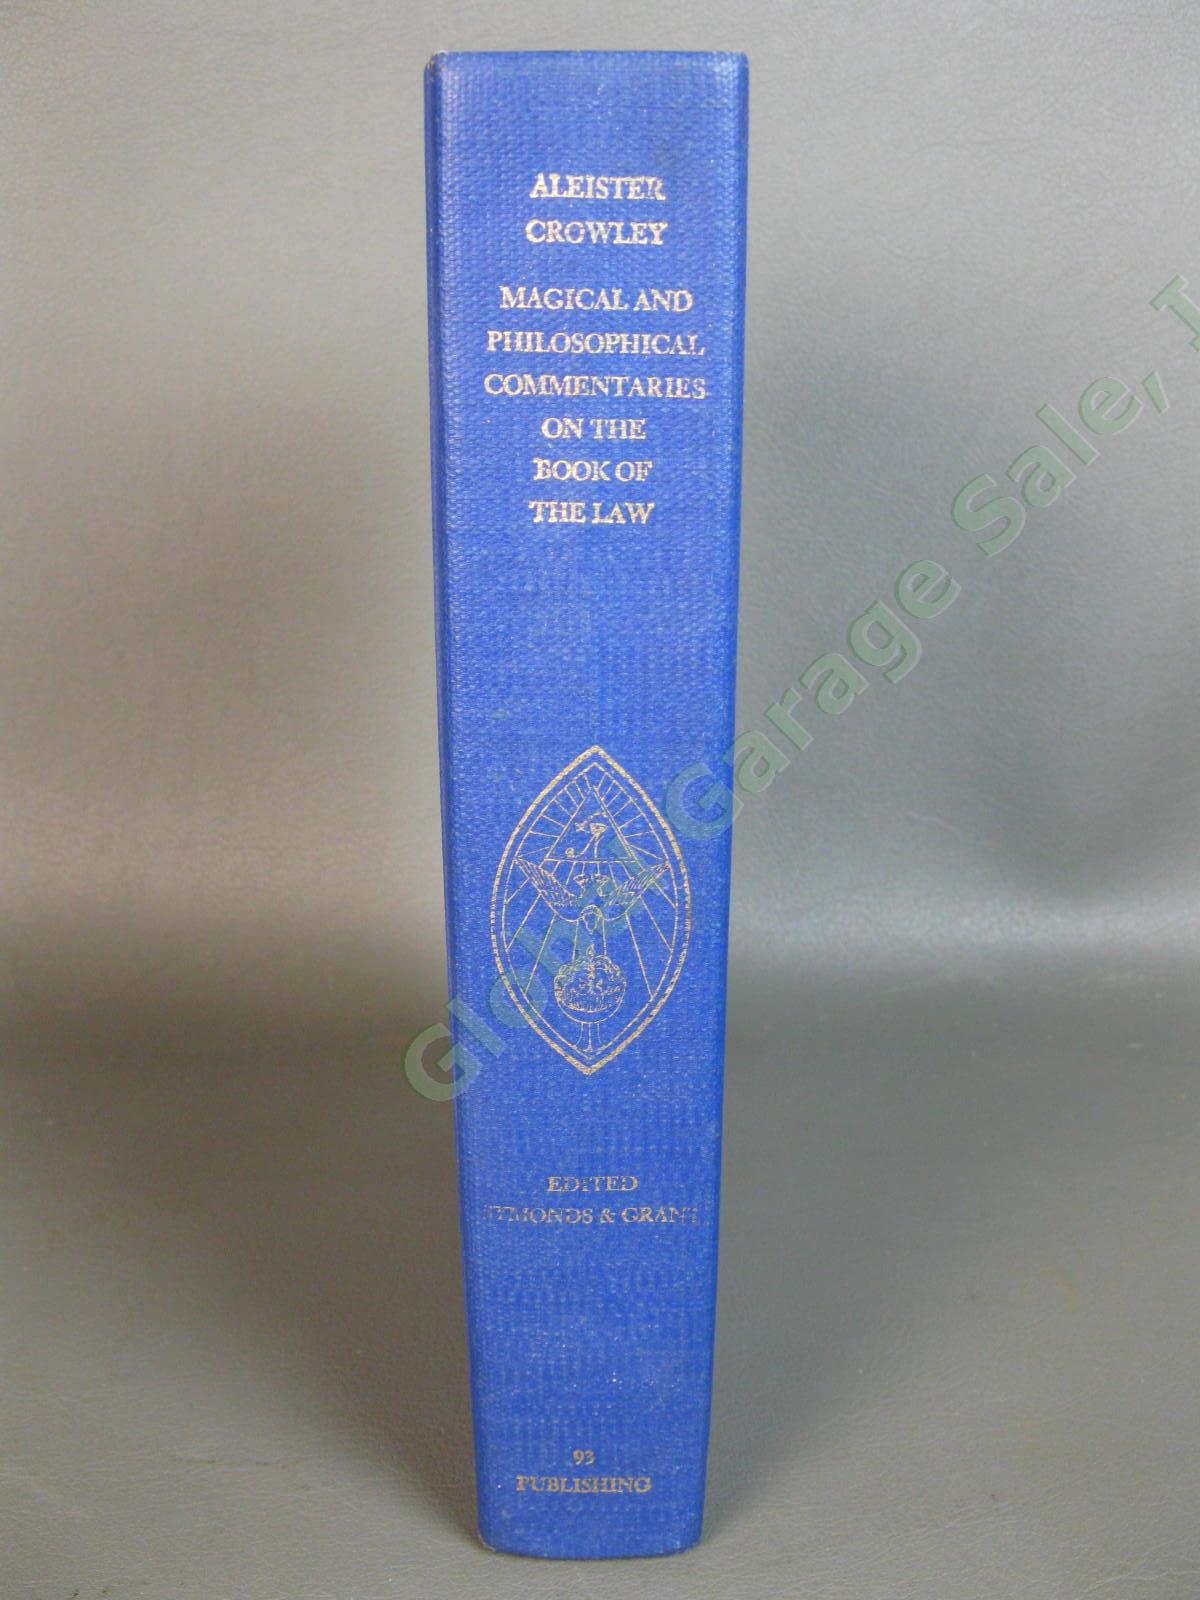 Aleister Crowley Magical Philosophical Commentaries on the Book of Law Grant NR 1